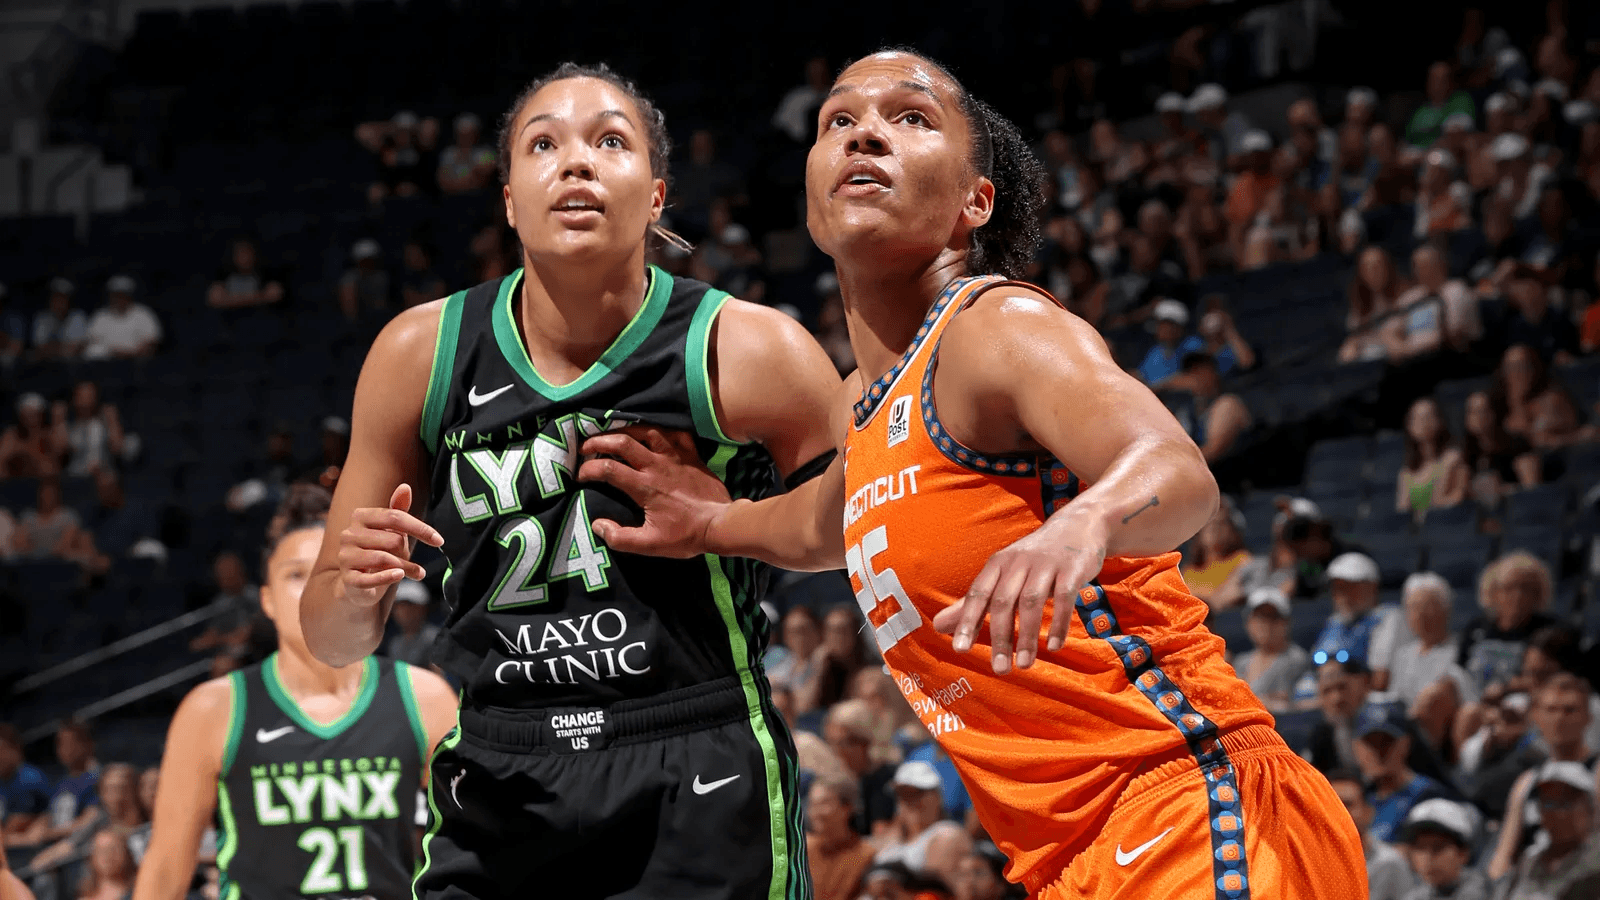 Minnesota Lynx vs Connecticut Sun Game 2: Preview, Odds & Best Bets cover